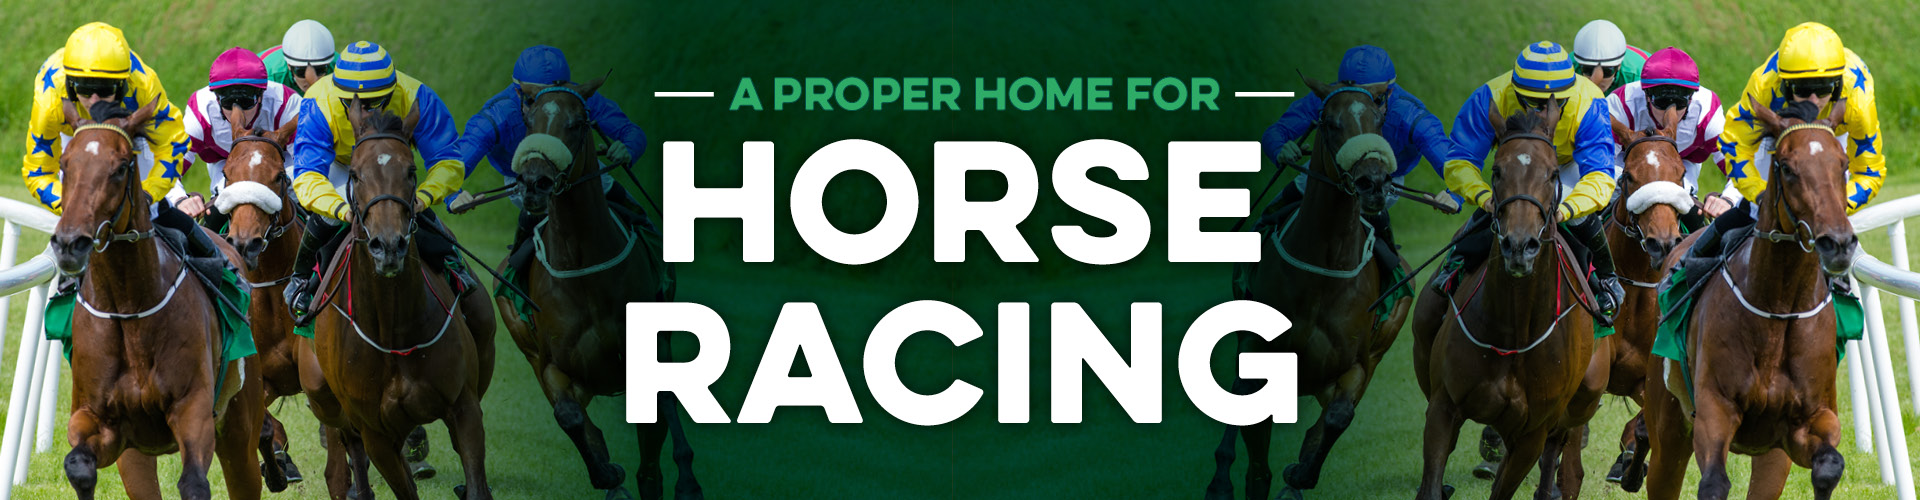 Watch horse racing live at Great UK Pubs